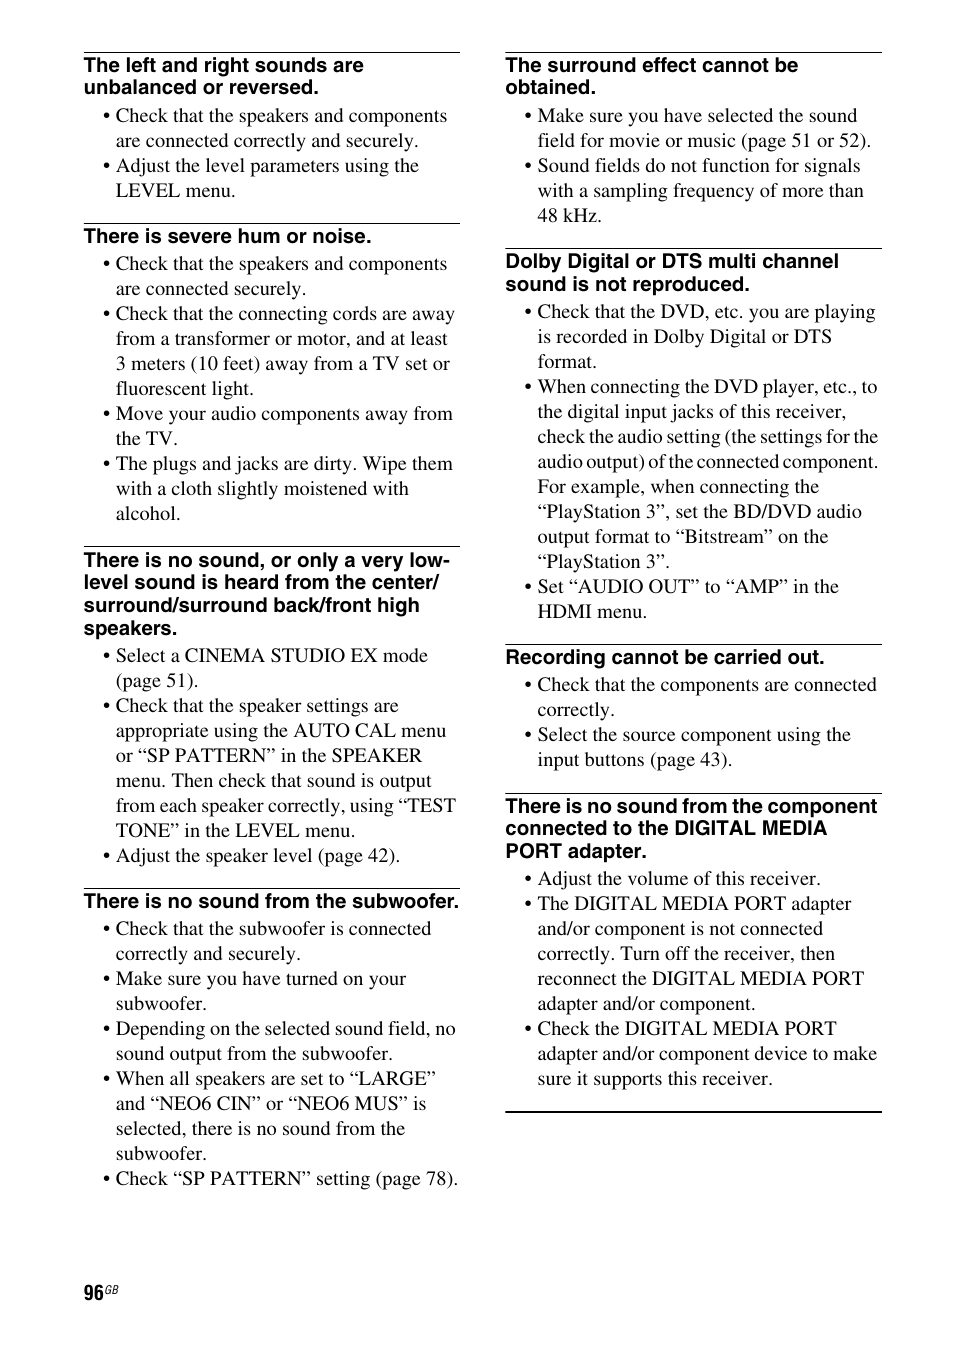 Sony STR-DH810 User Manual | Page 96 / 104